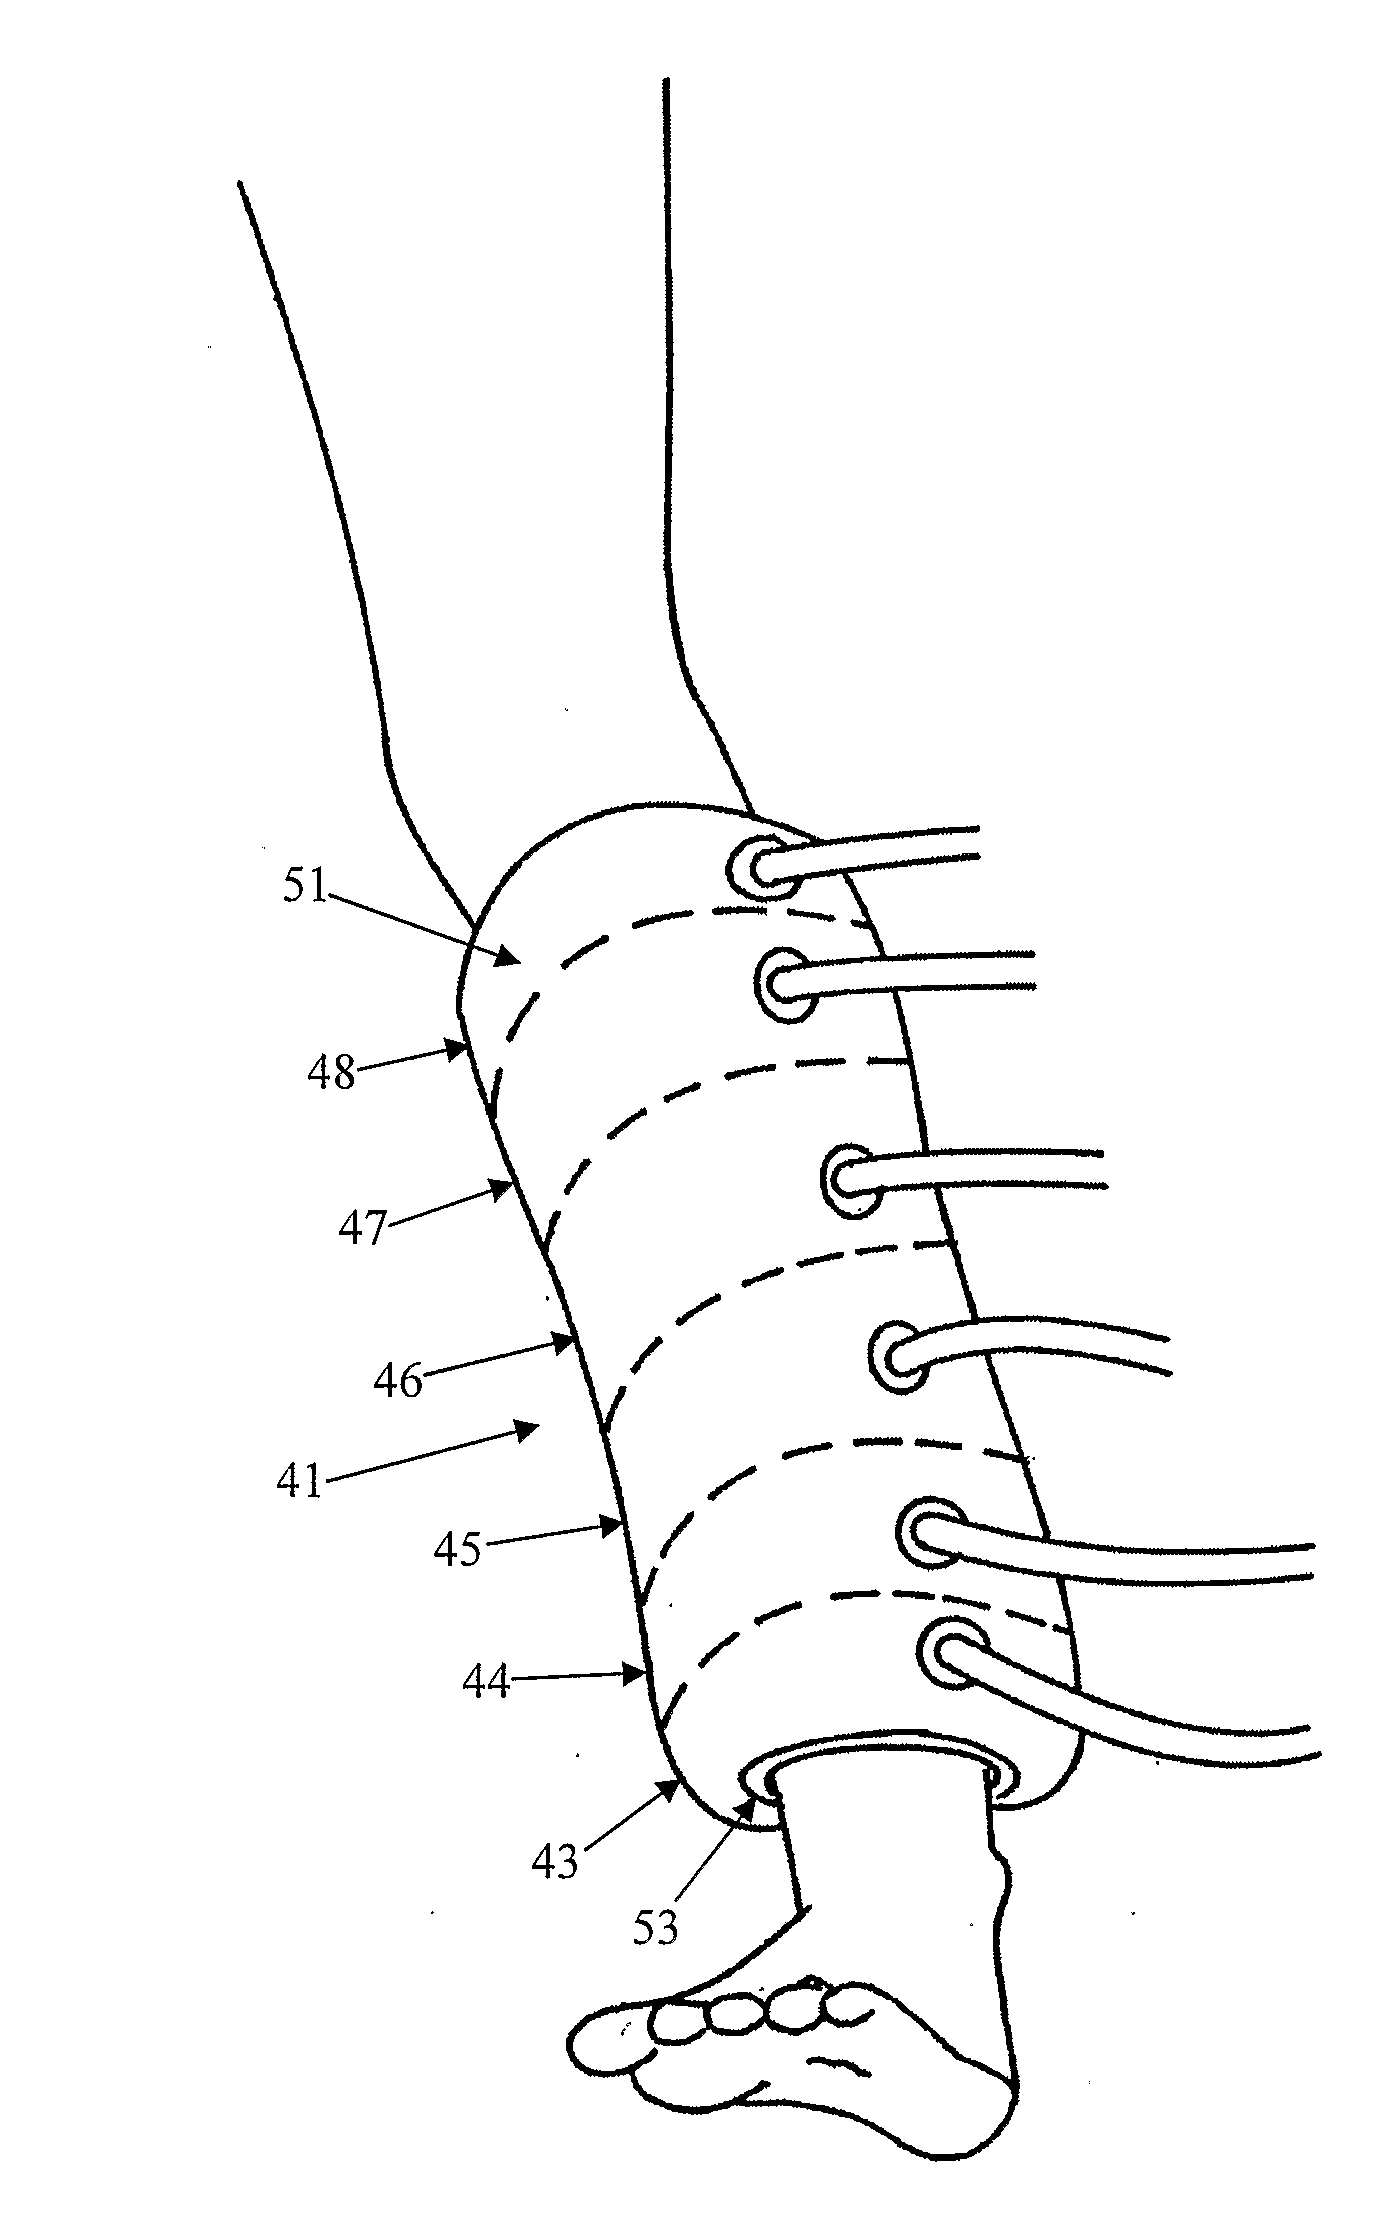 Apparatus for Preventing Deep Vein Thrombosis